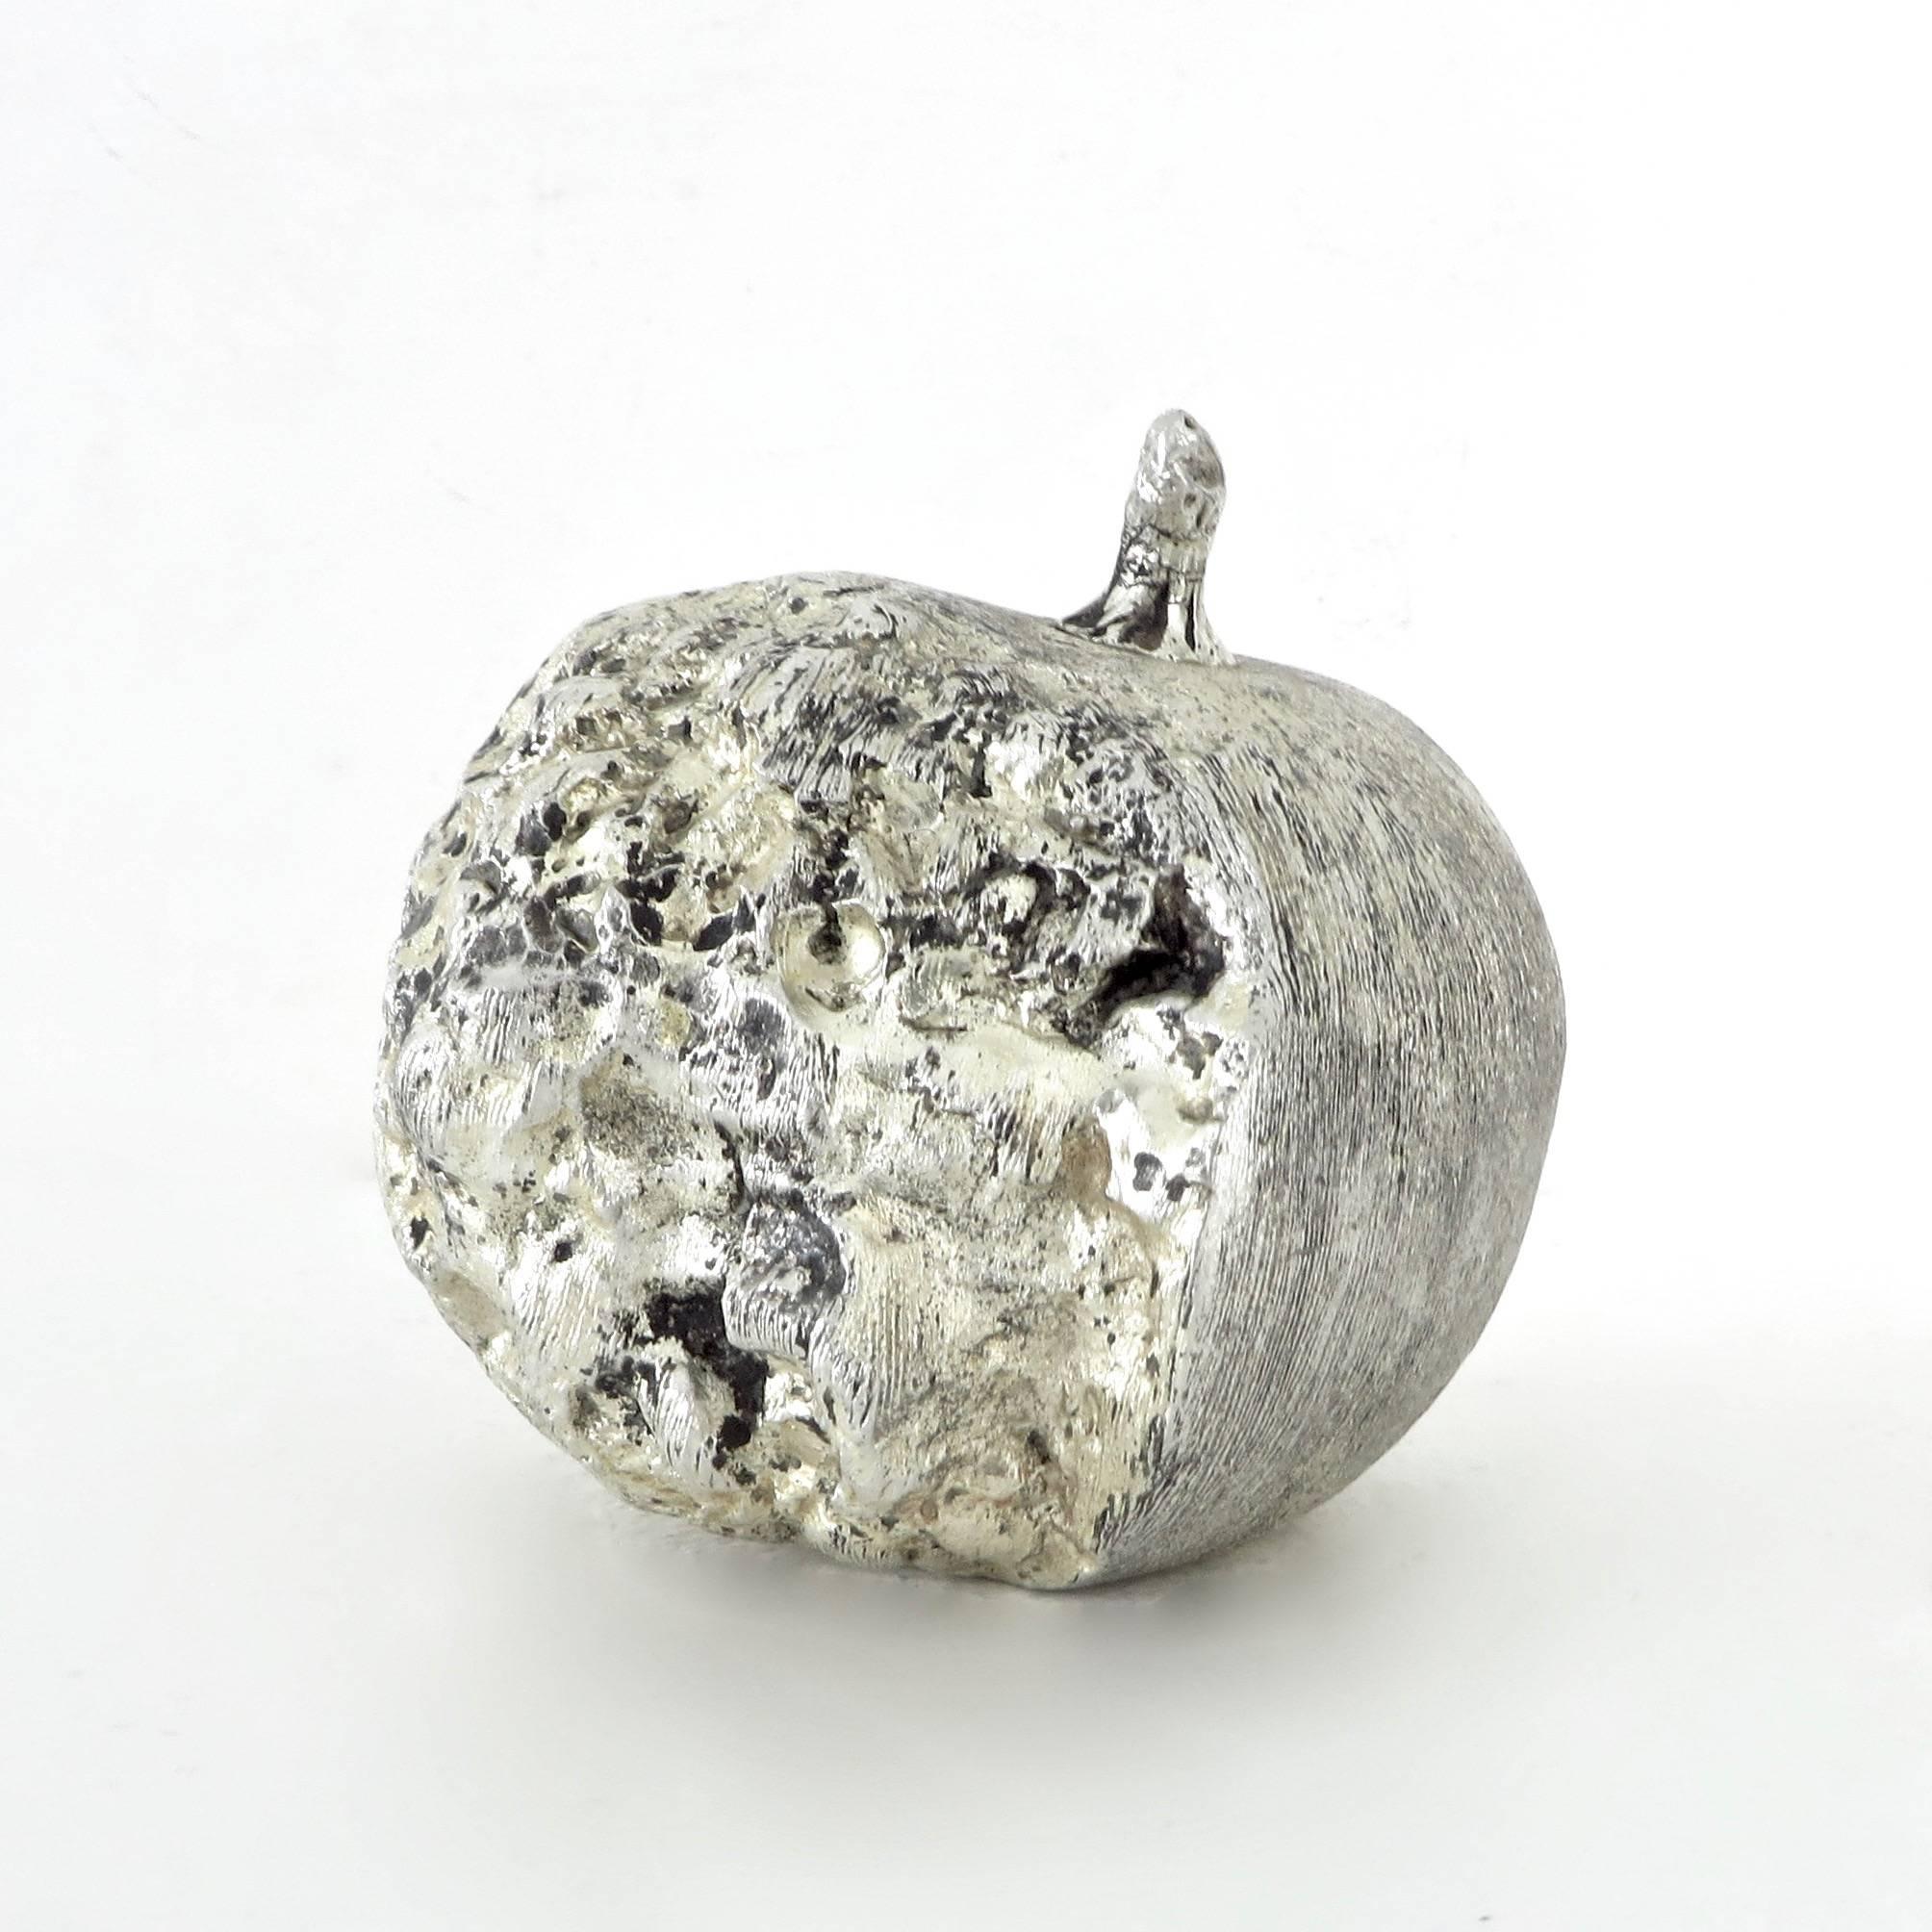 A small lifesize silver leafed bronze sculpture of a pomegranate. 
Finely detailed. 
Signed E.B.